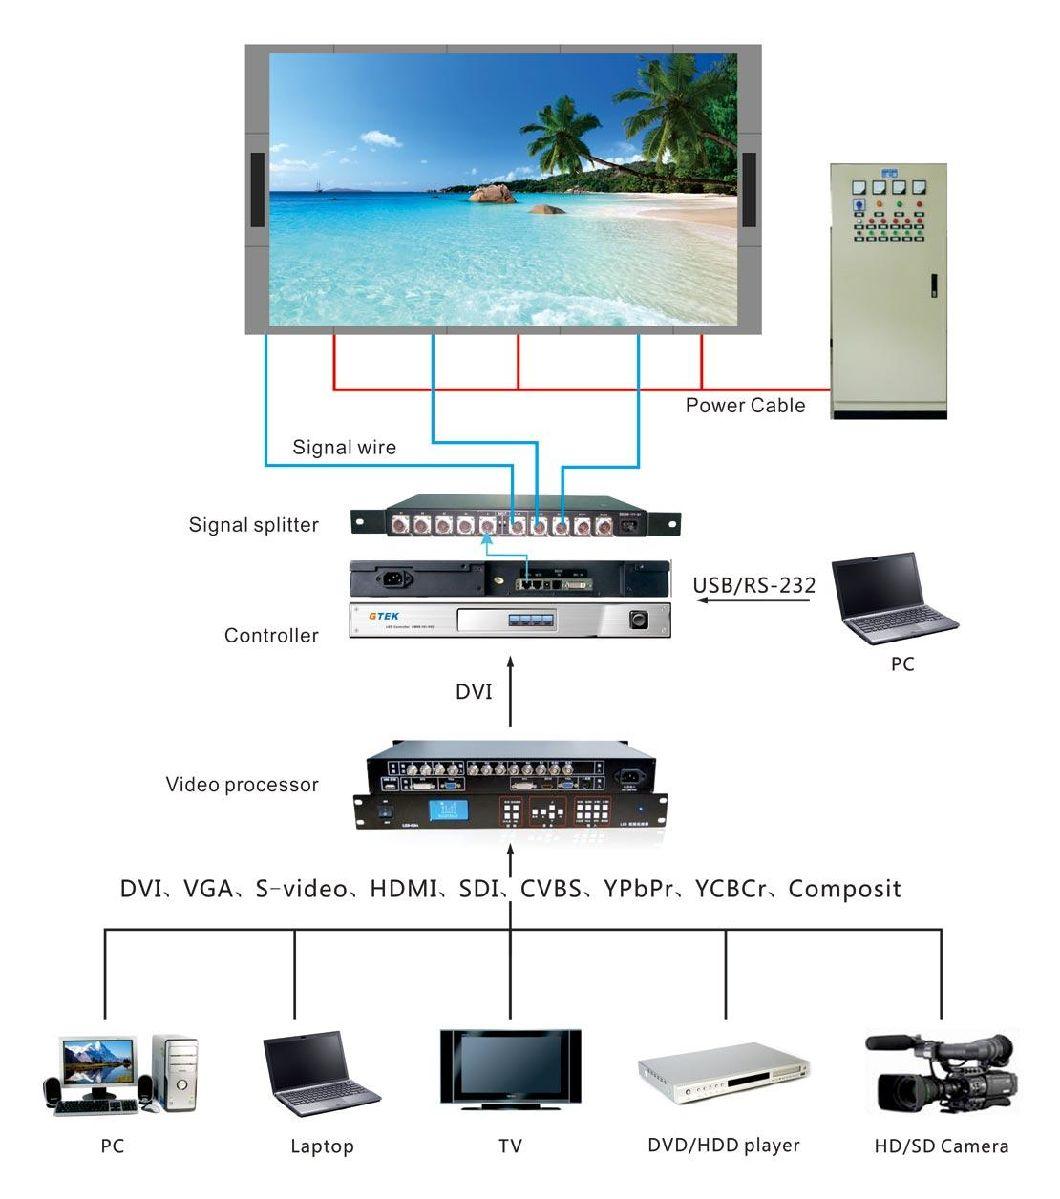 P10 Outdoor Digital Video Wall Screen Giant Electronic Billboard for Advertisements